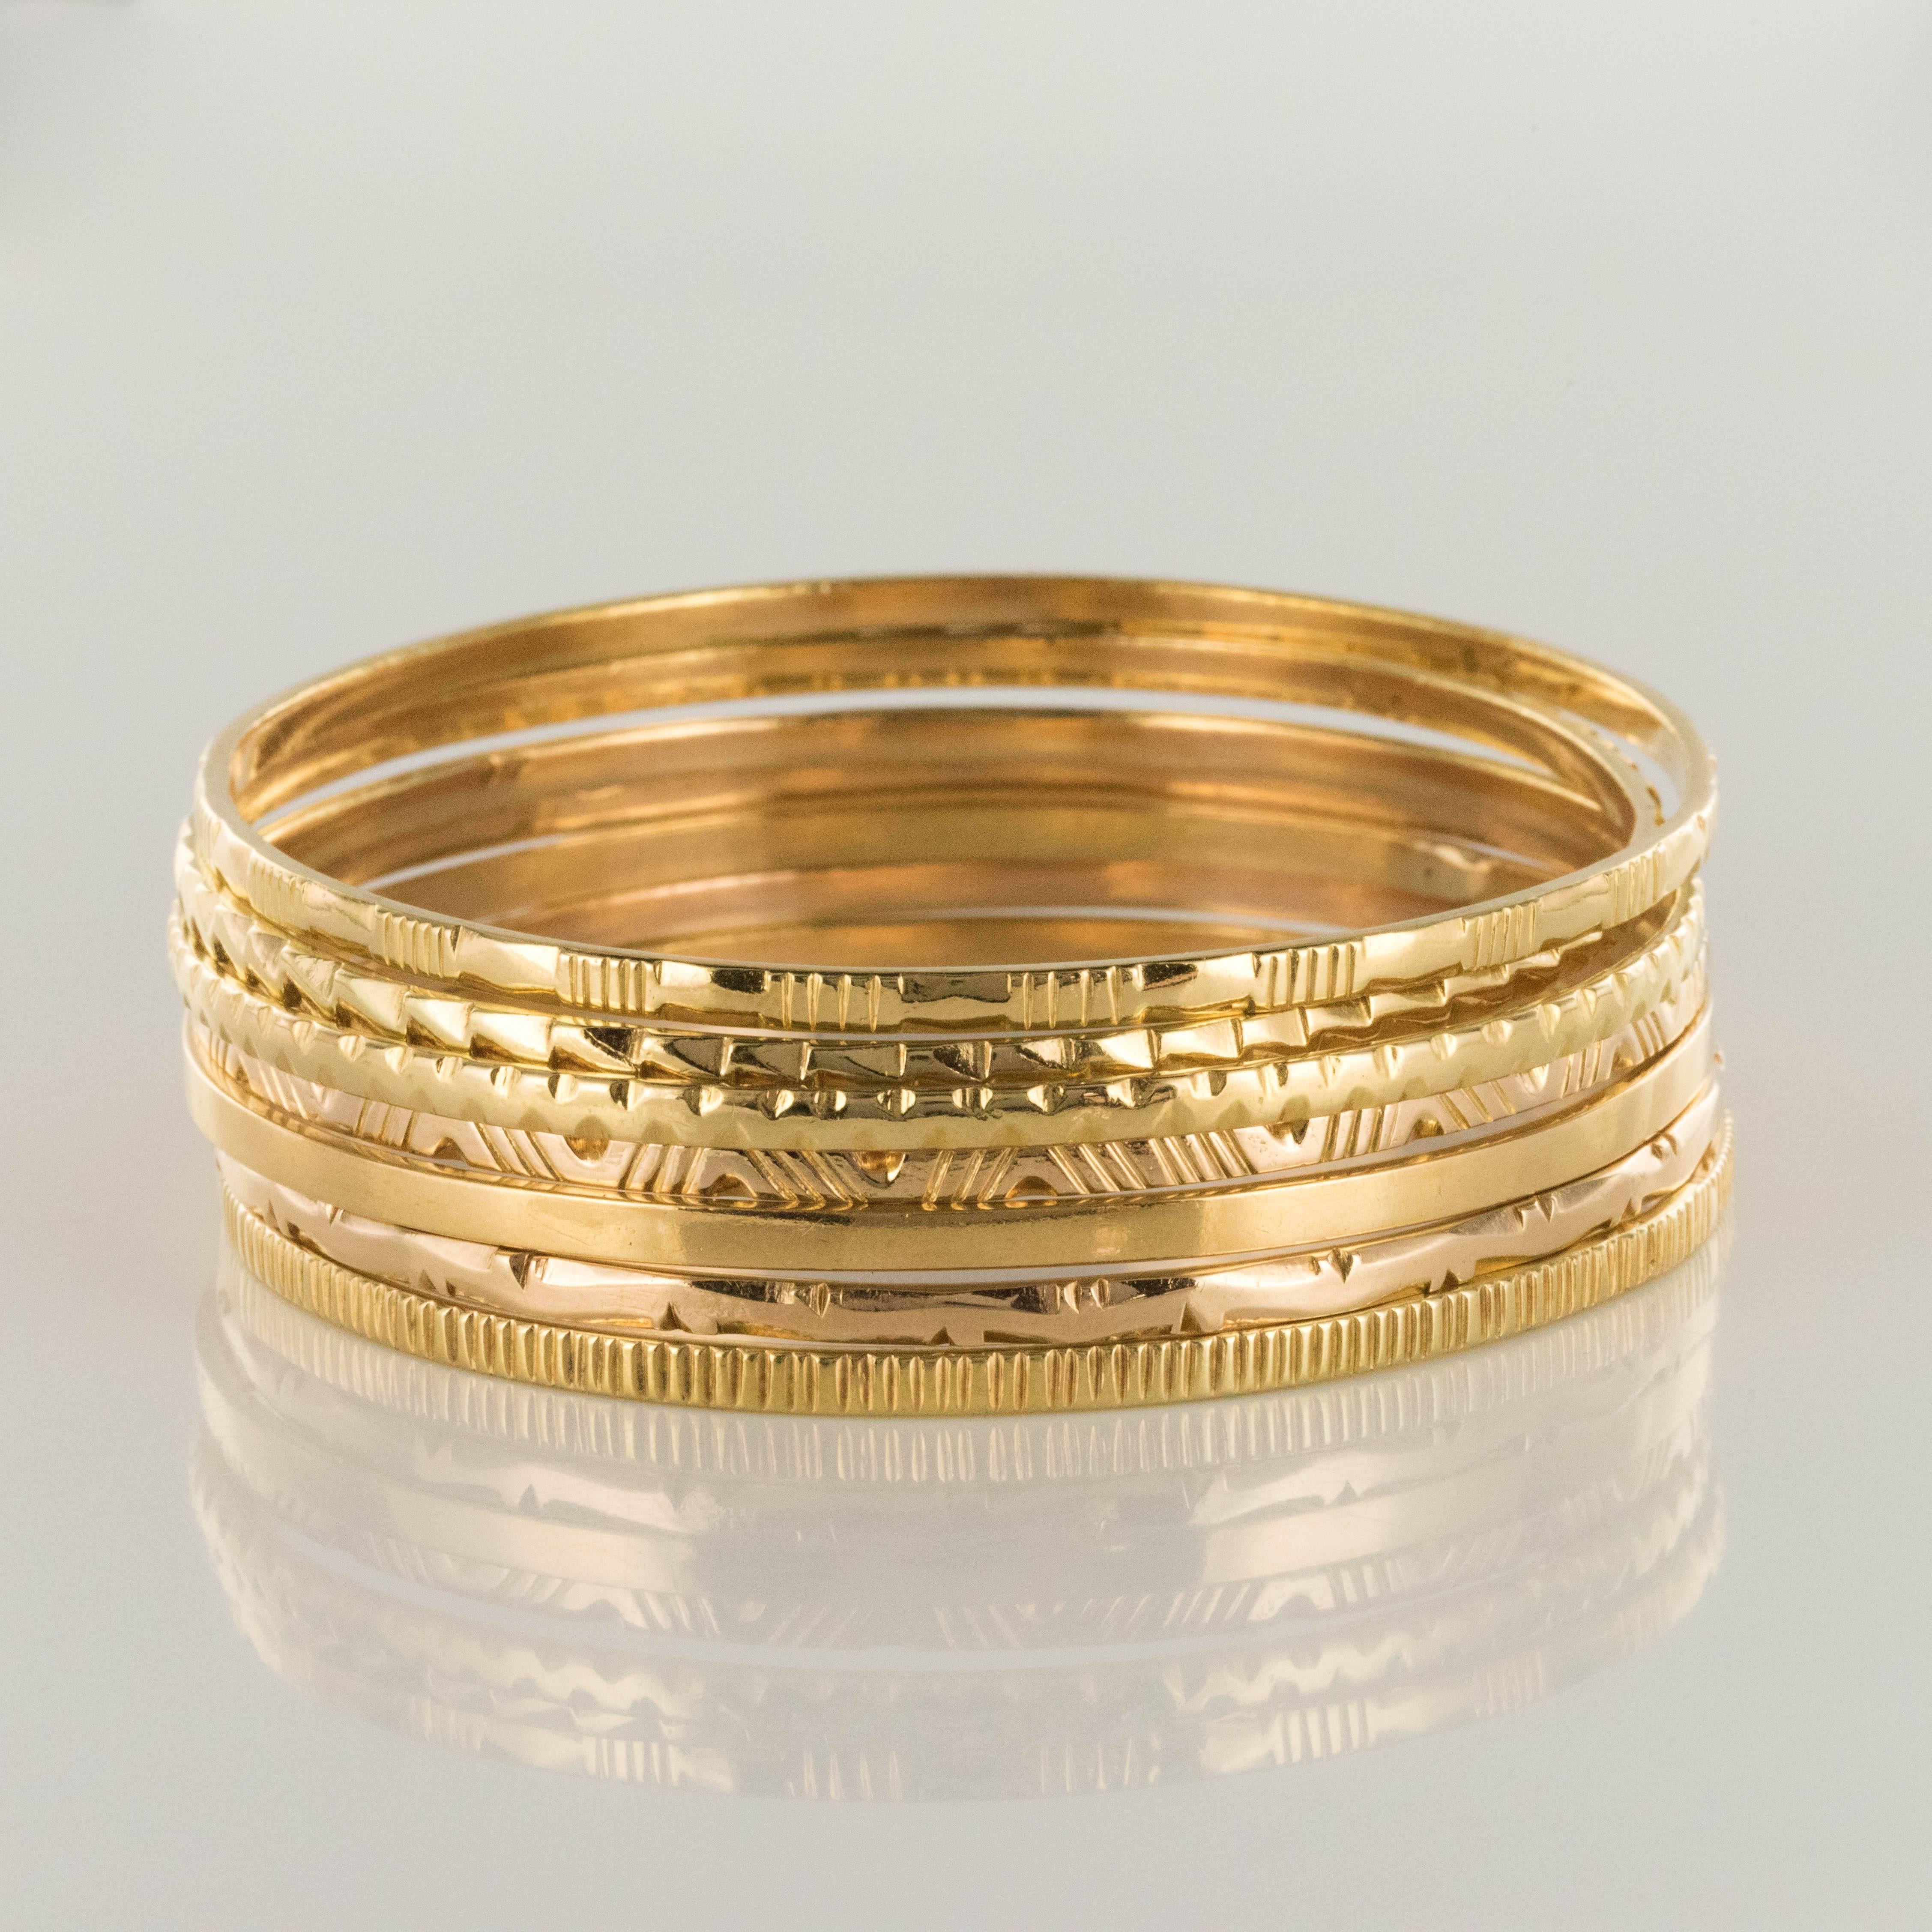 Bracelet in 18 karats yellow gold.
This bracelet is made up of 7 round half bangles in yellow gold and engraved each with a different decoration. The bangles can be worn together or separately and slip on.
Inner circumference: 19 cm, width: 2.6 mm,